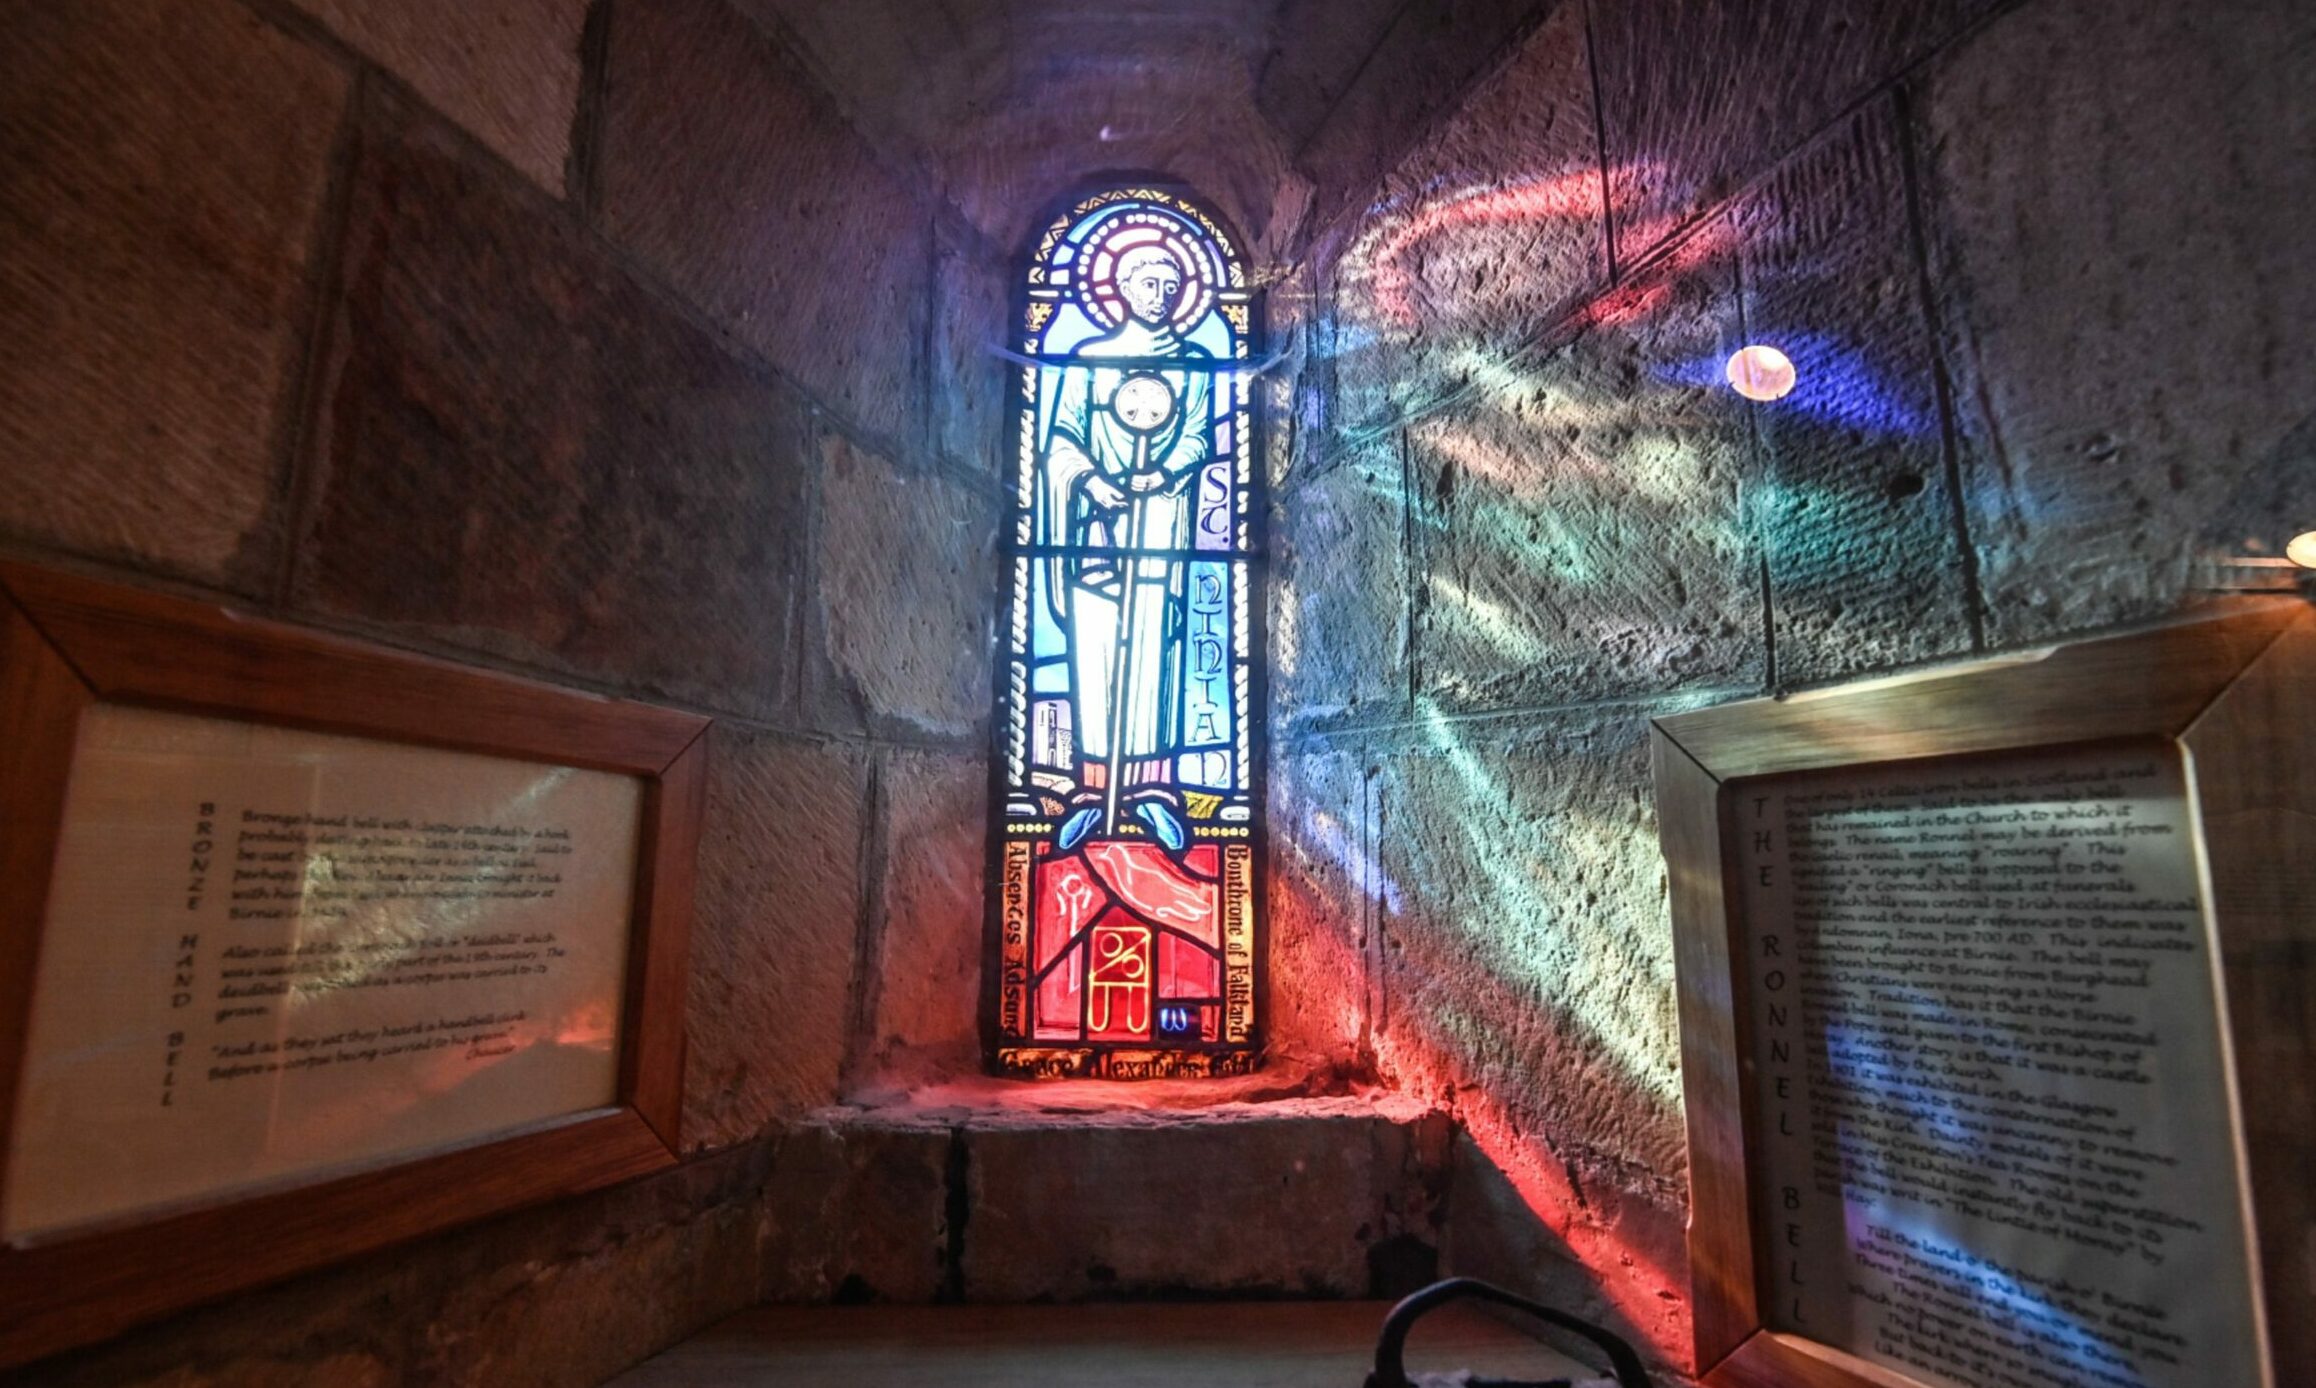 Colourful light bursting through stained glass window.